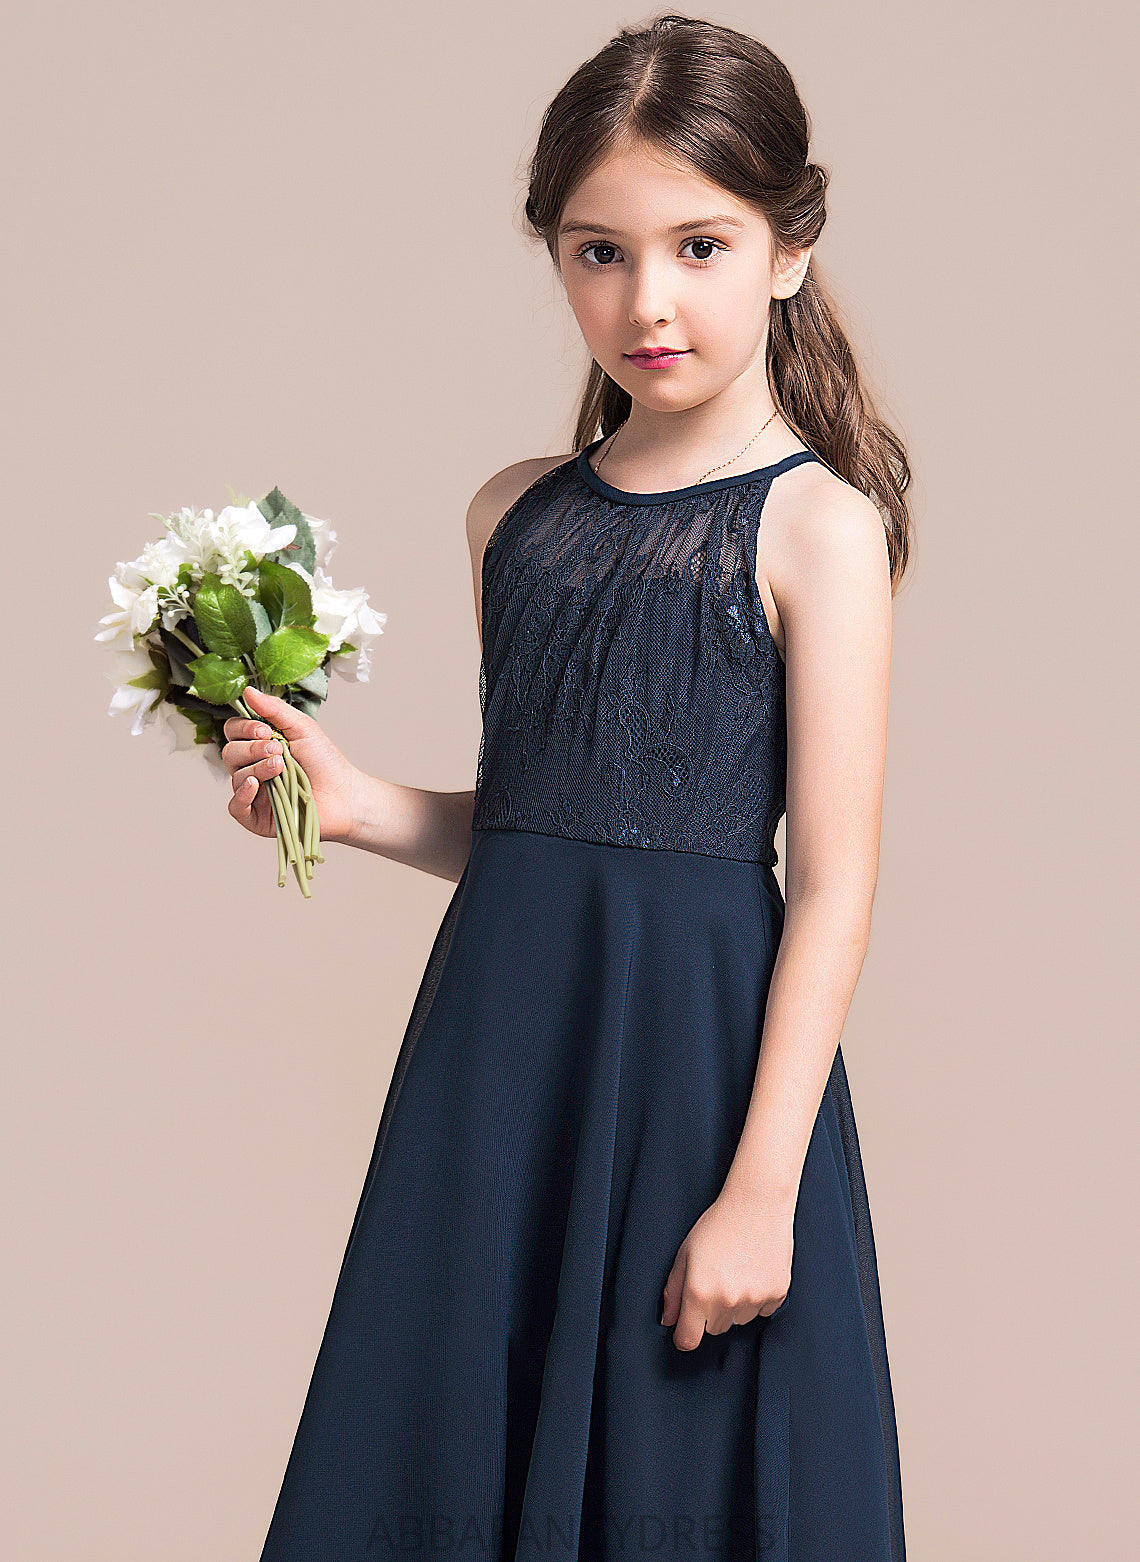 Scoop Chiffon Neck Heather With Lace Tea-Length Ruffle A-Line Junior Bridesmaid Dresses